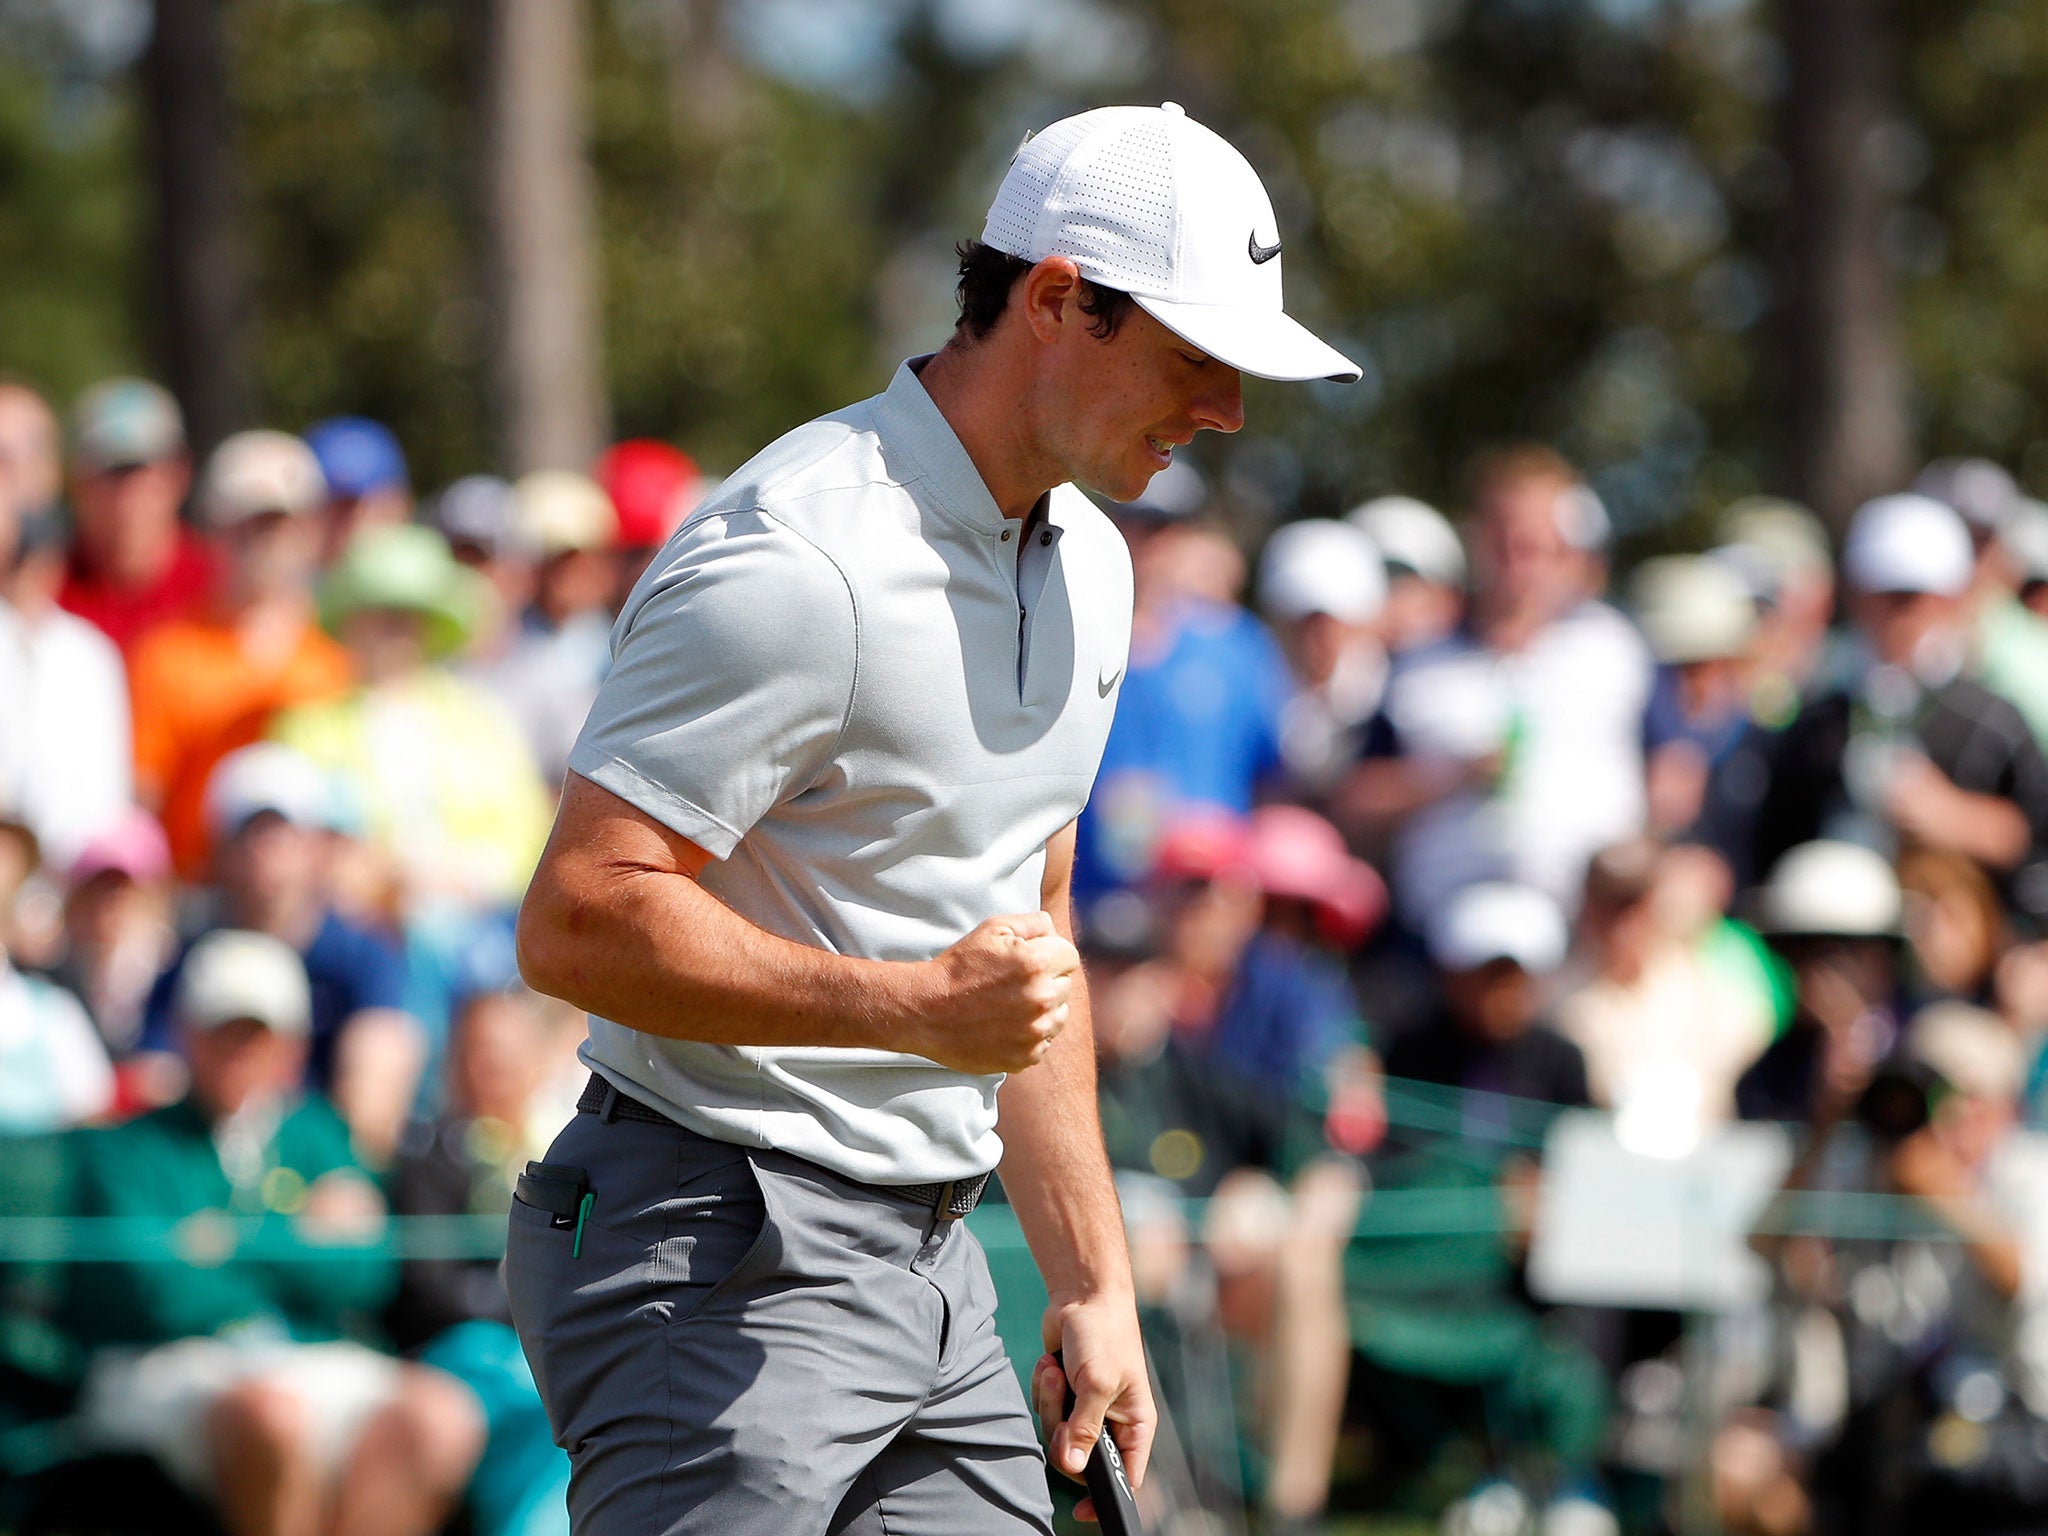 Rory McIlroy won at Quail Hollow last year by seven shots